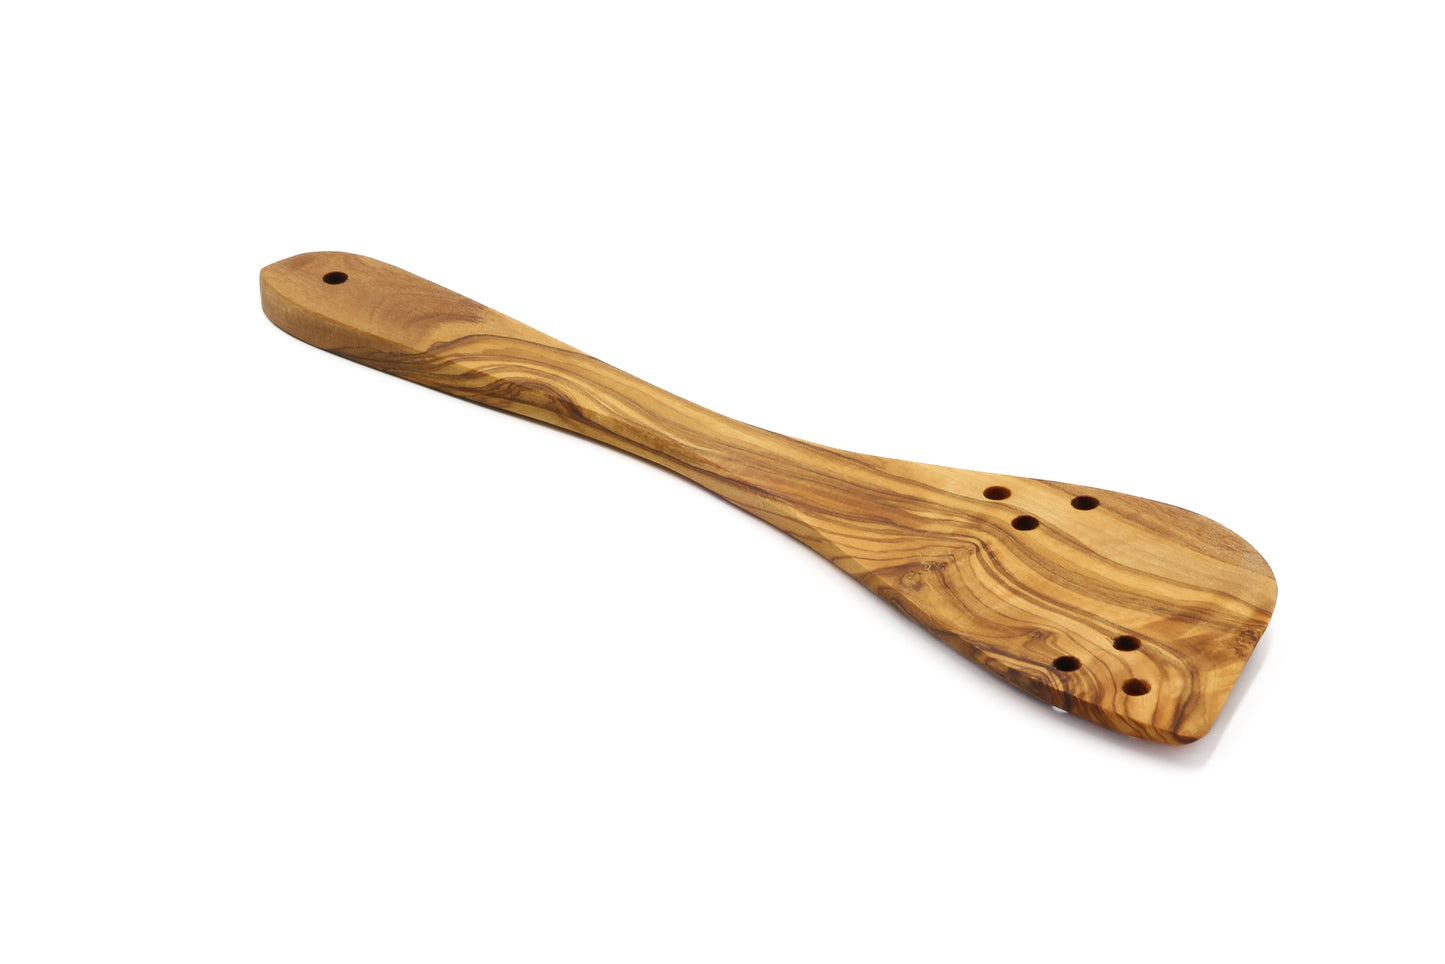 Durable olive wood utensil with slotted design